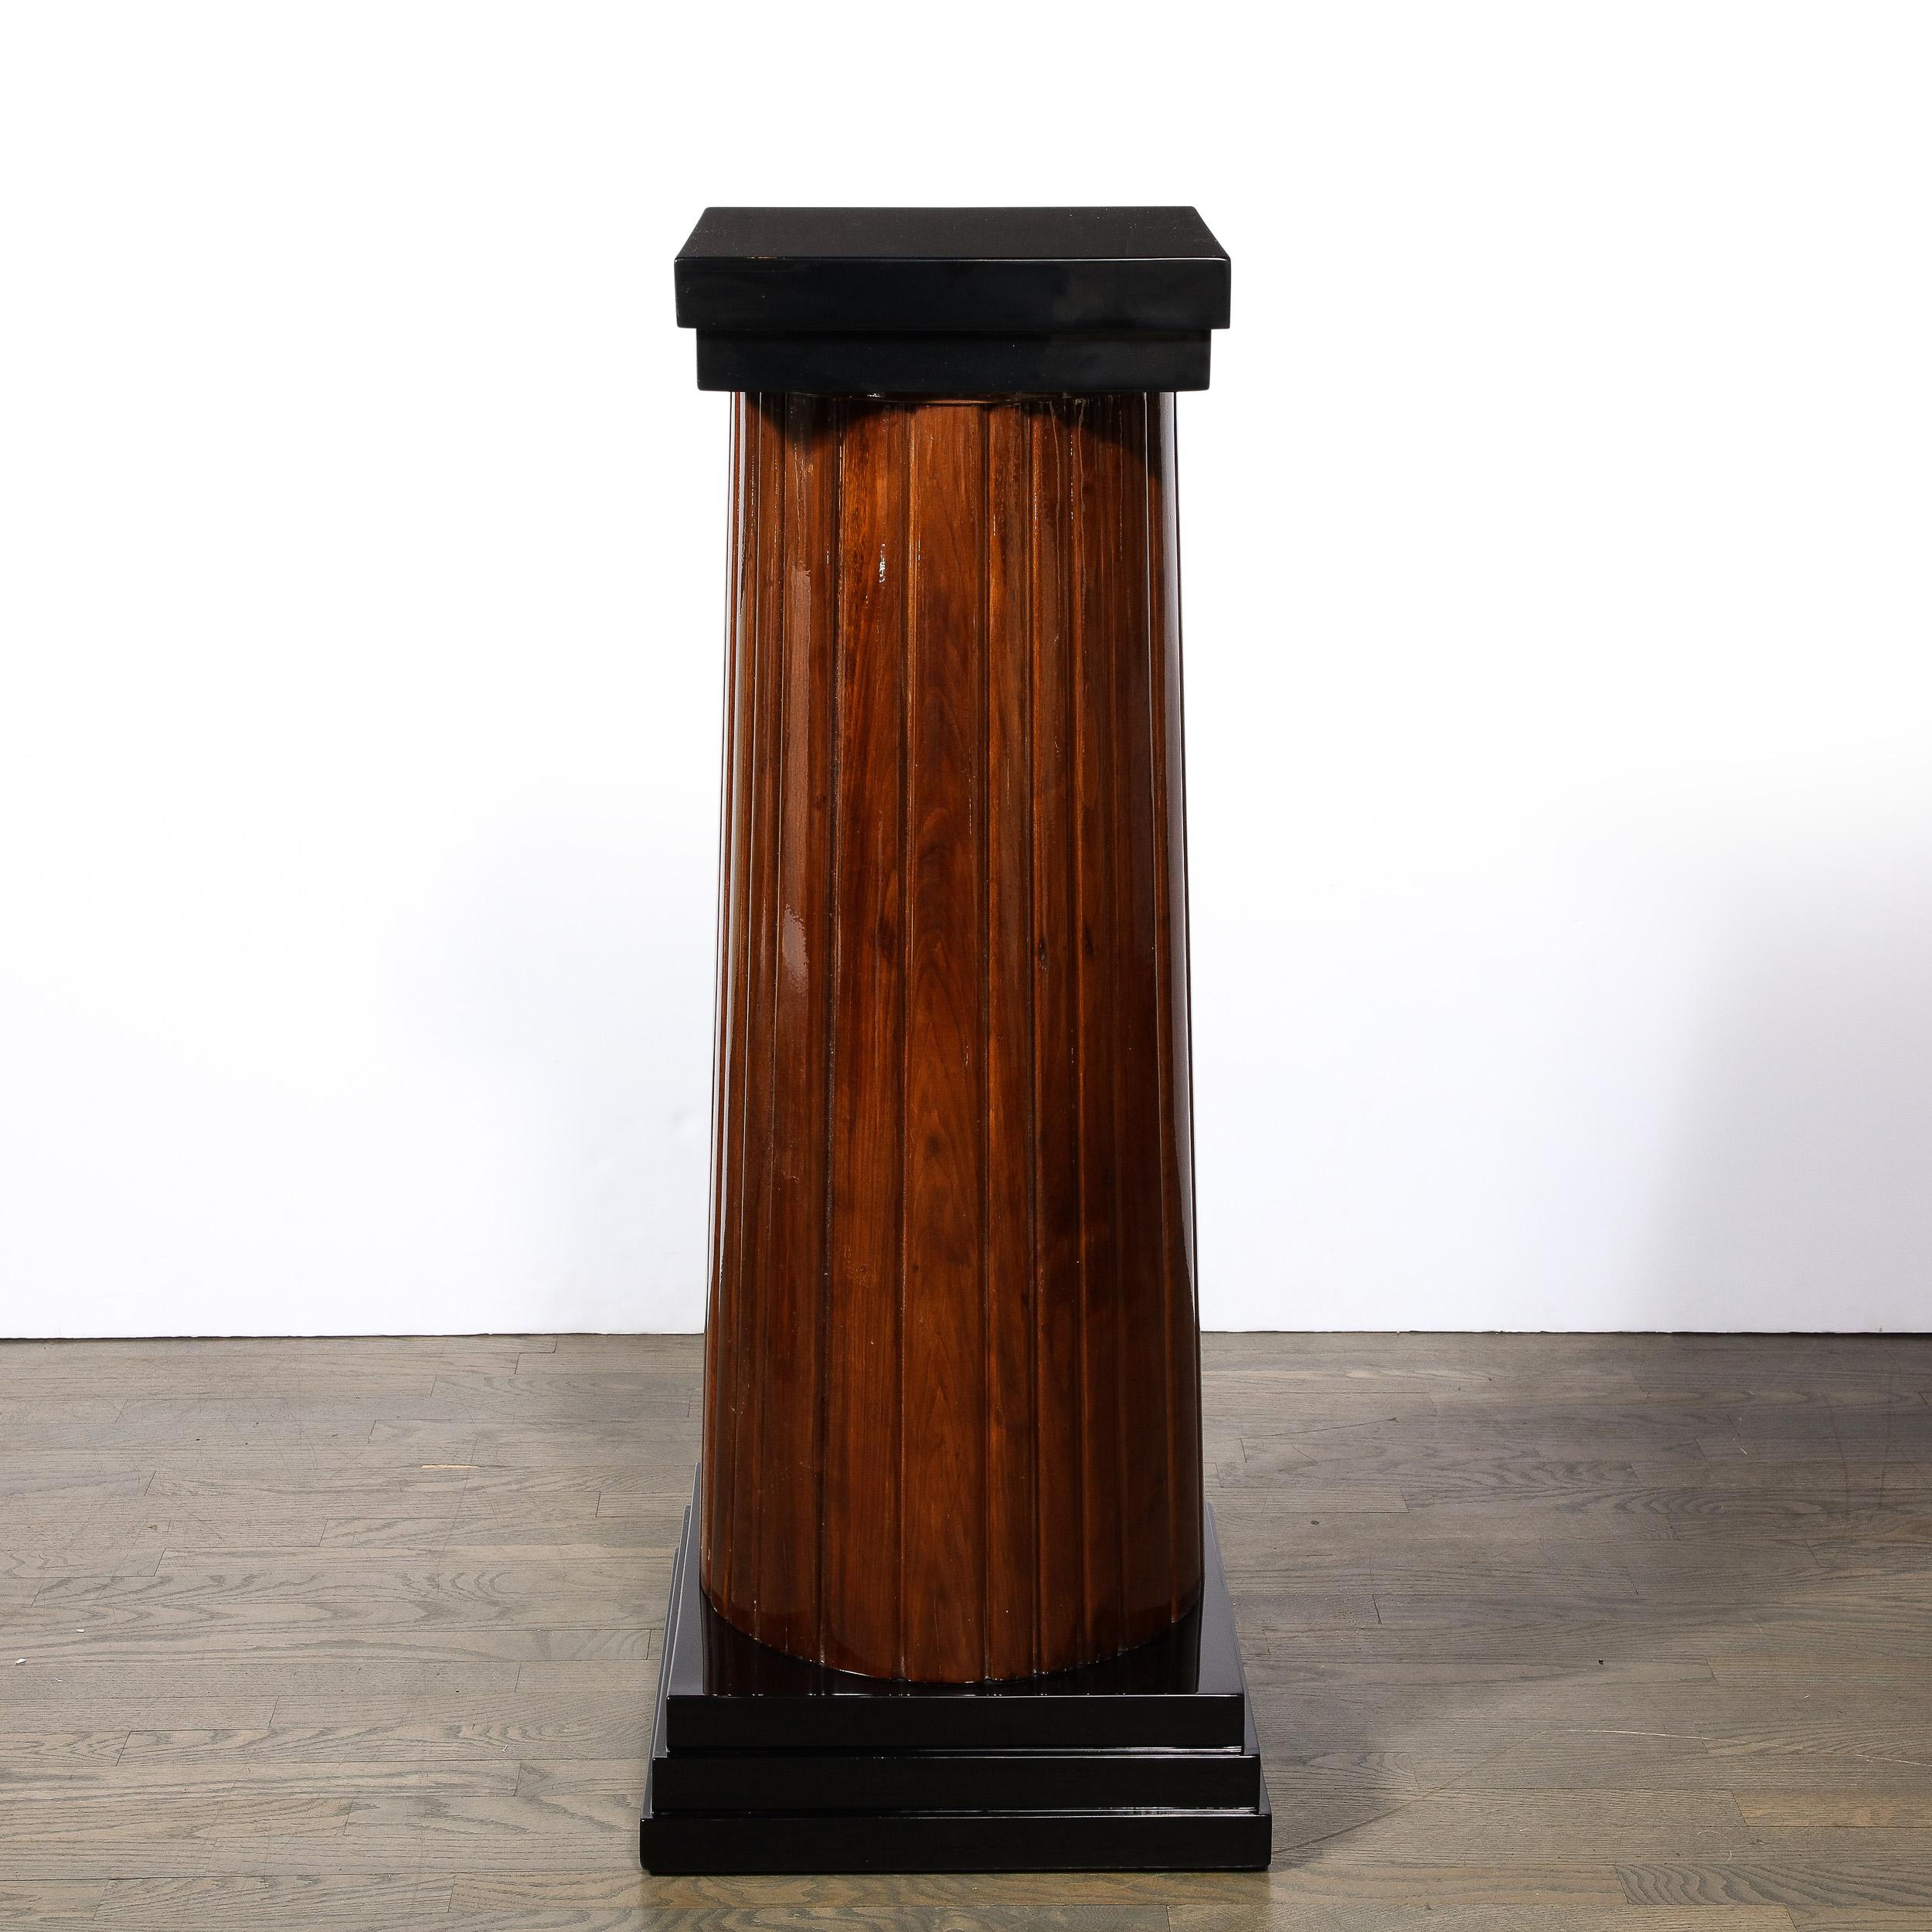 This monumental and impressive Art Deco pedestal was realized in the United States circa 1940. It features a skyscraper style base consisting of three stacked tiers of lustrous black lacquer that supports a fluted column in walnut and is crowned by